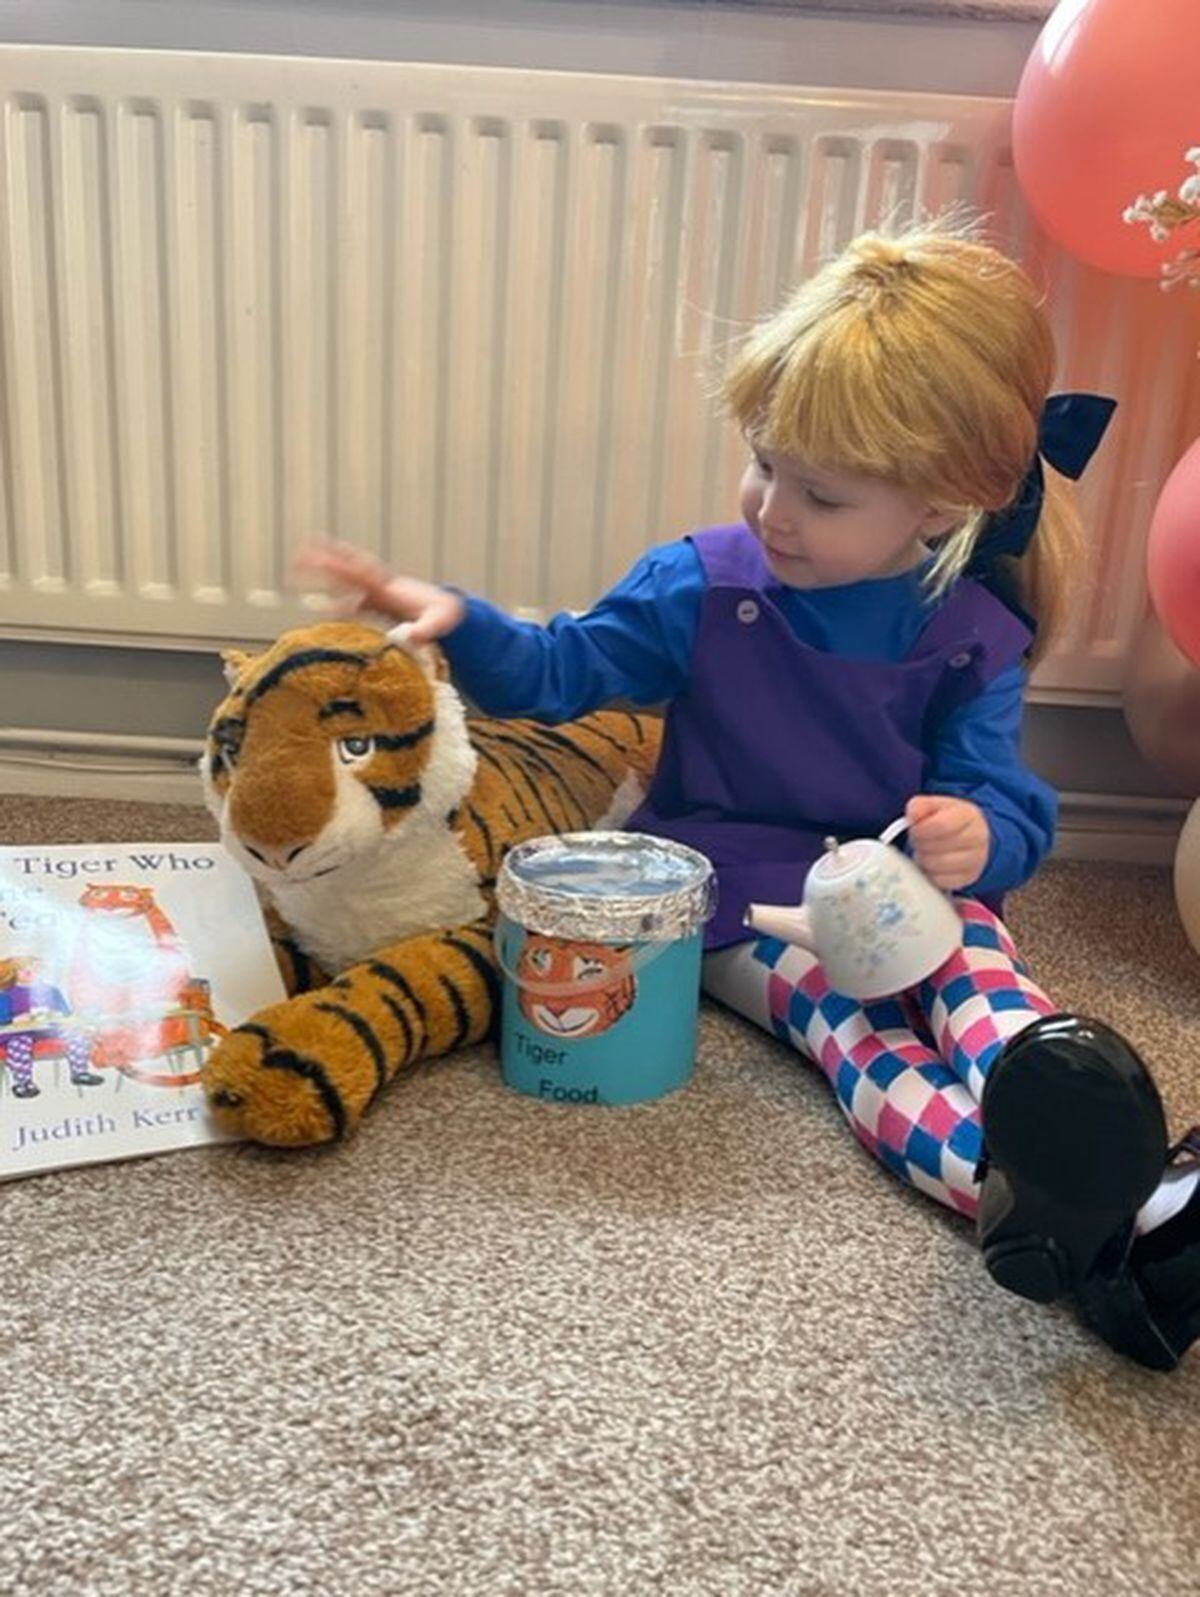 Amanda Walker made little Sophie's costume for the Tiger Who Came to Tea.